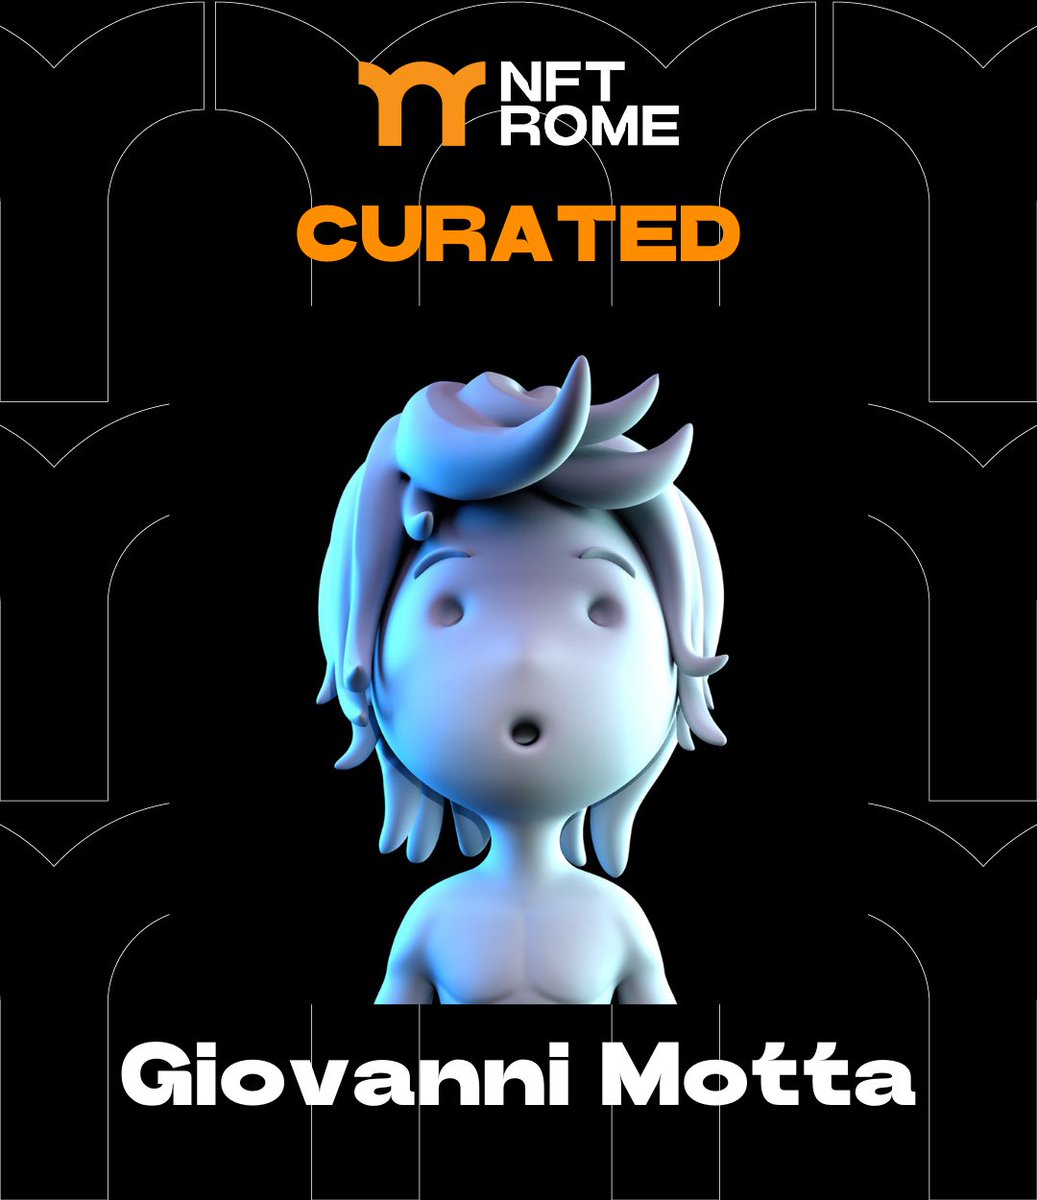 We are pleased to announce that @mottagio1971 will be part of our 'Curated Initiative' at NFT Rome. Giovanni Motta is an Italian artist known for his distinctive style that blends contemporary pop culture with traditional influences.